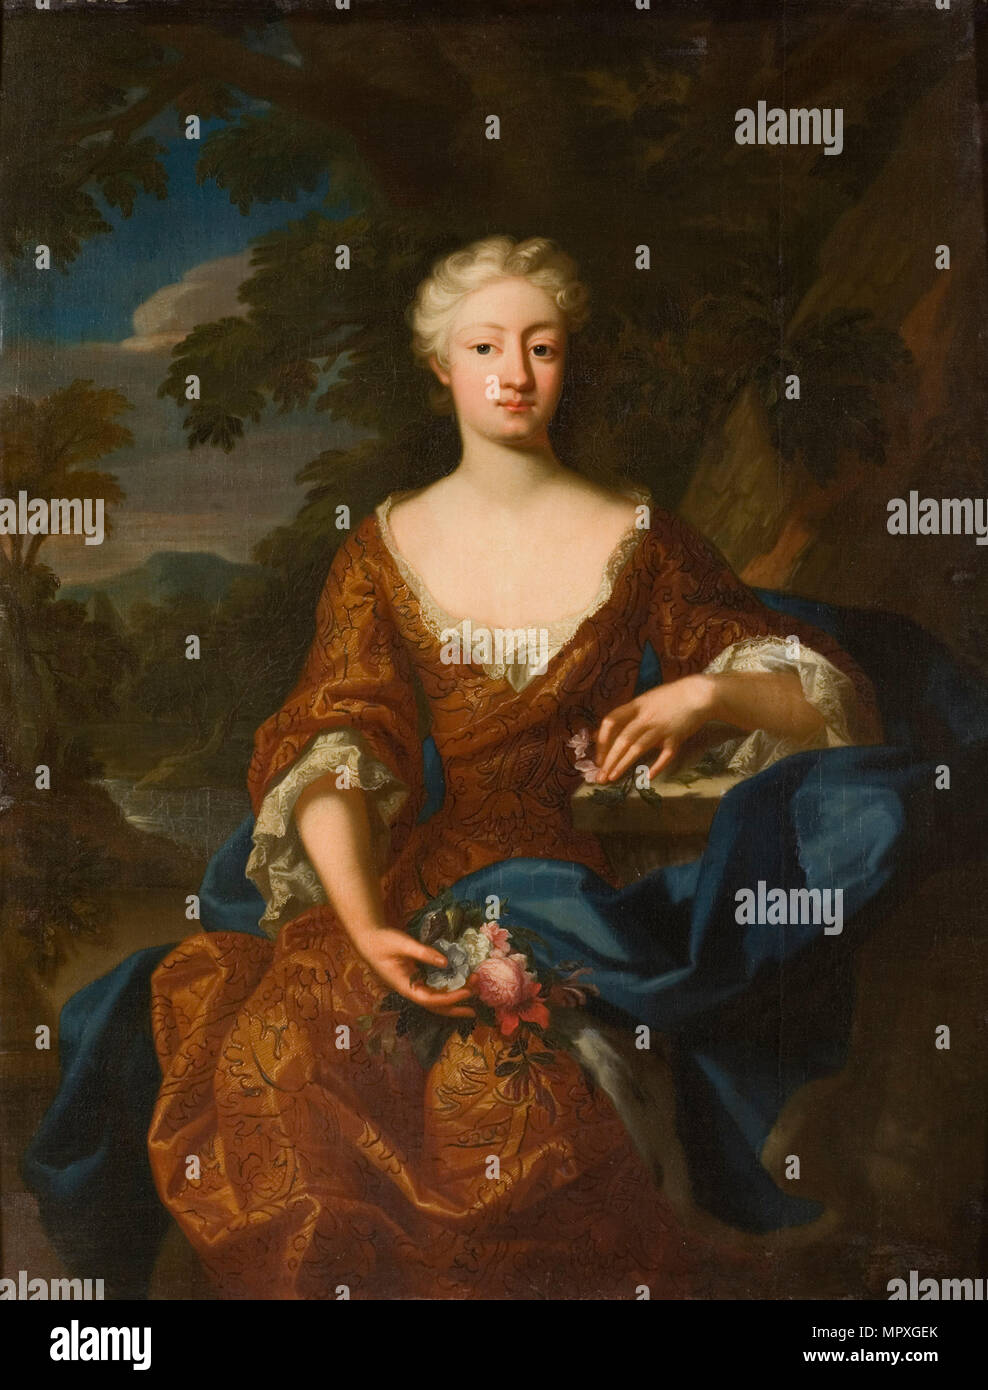 Portrait of Princess Luise Dorothea of Prussia (1680-1705), 1724. Stock Photo